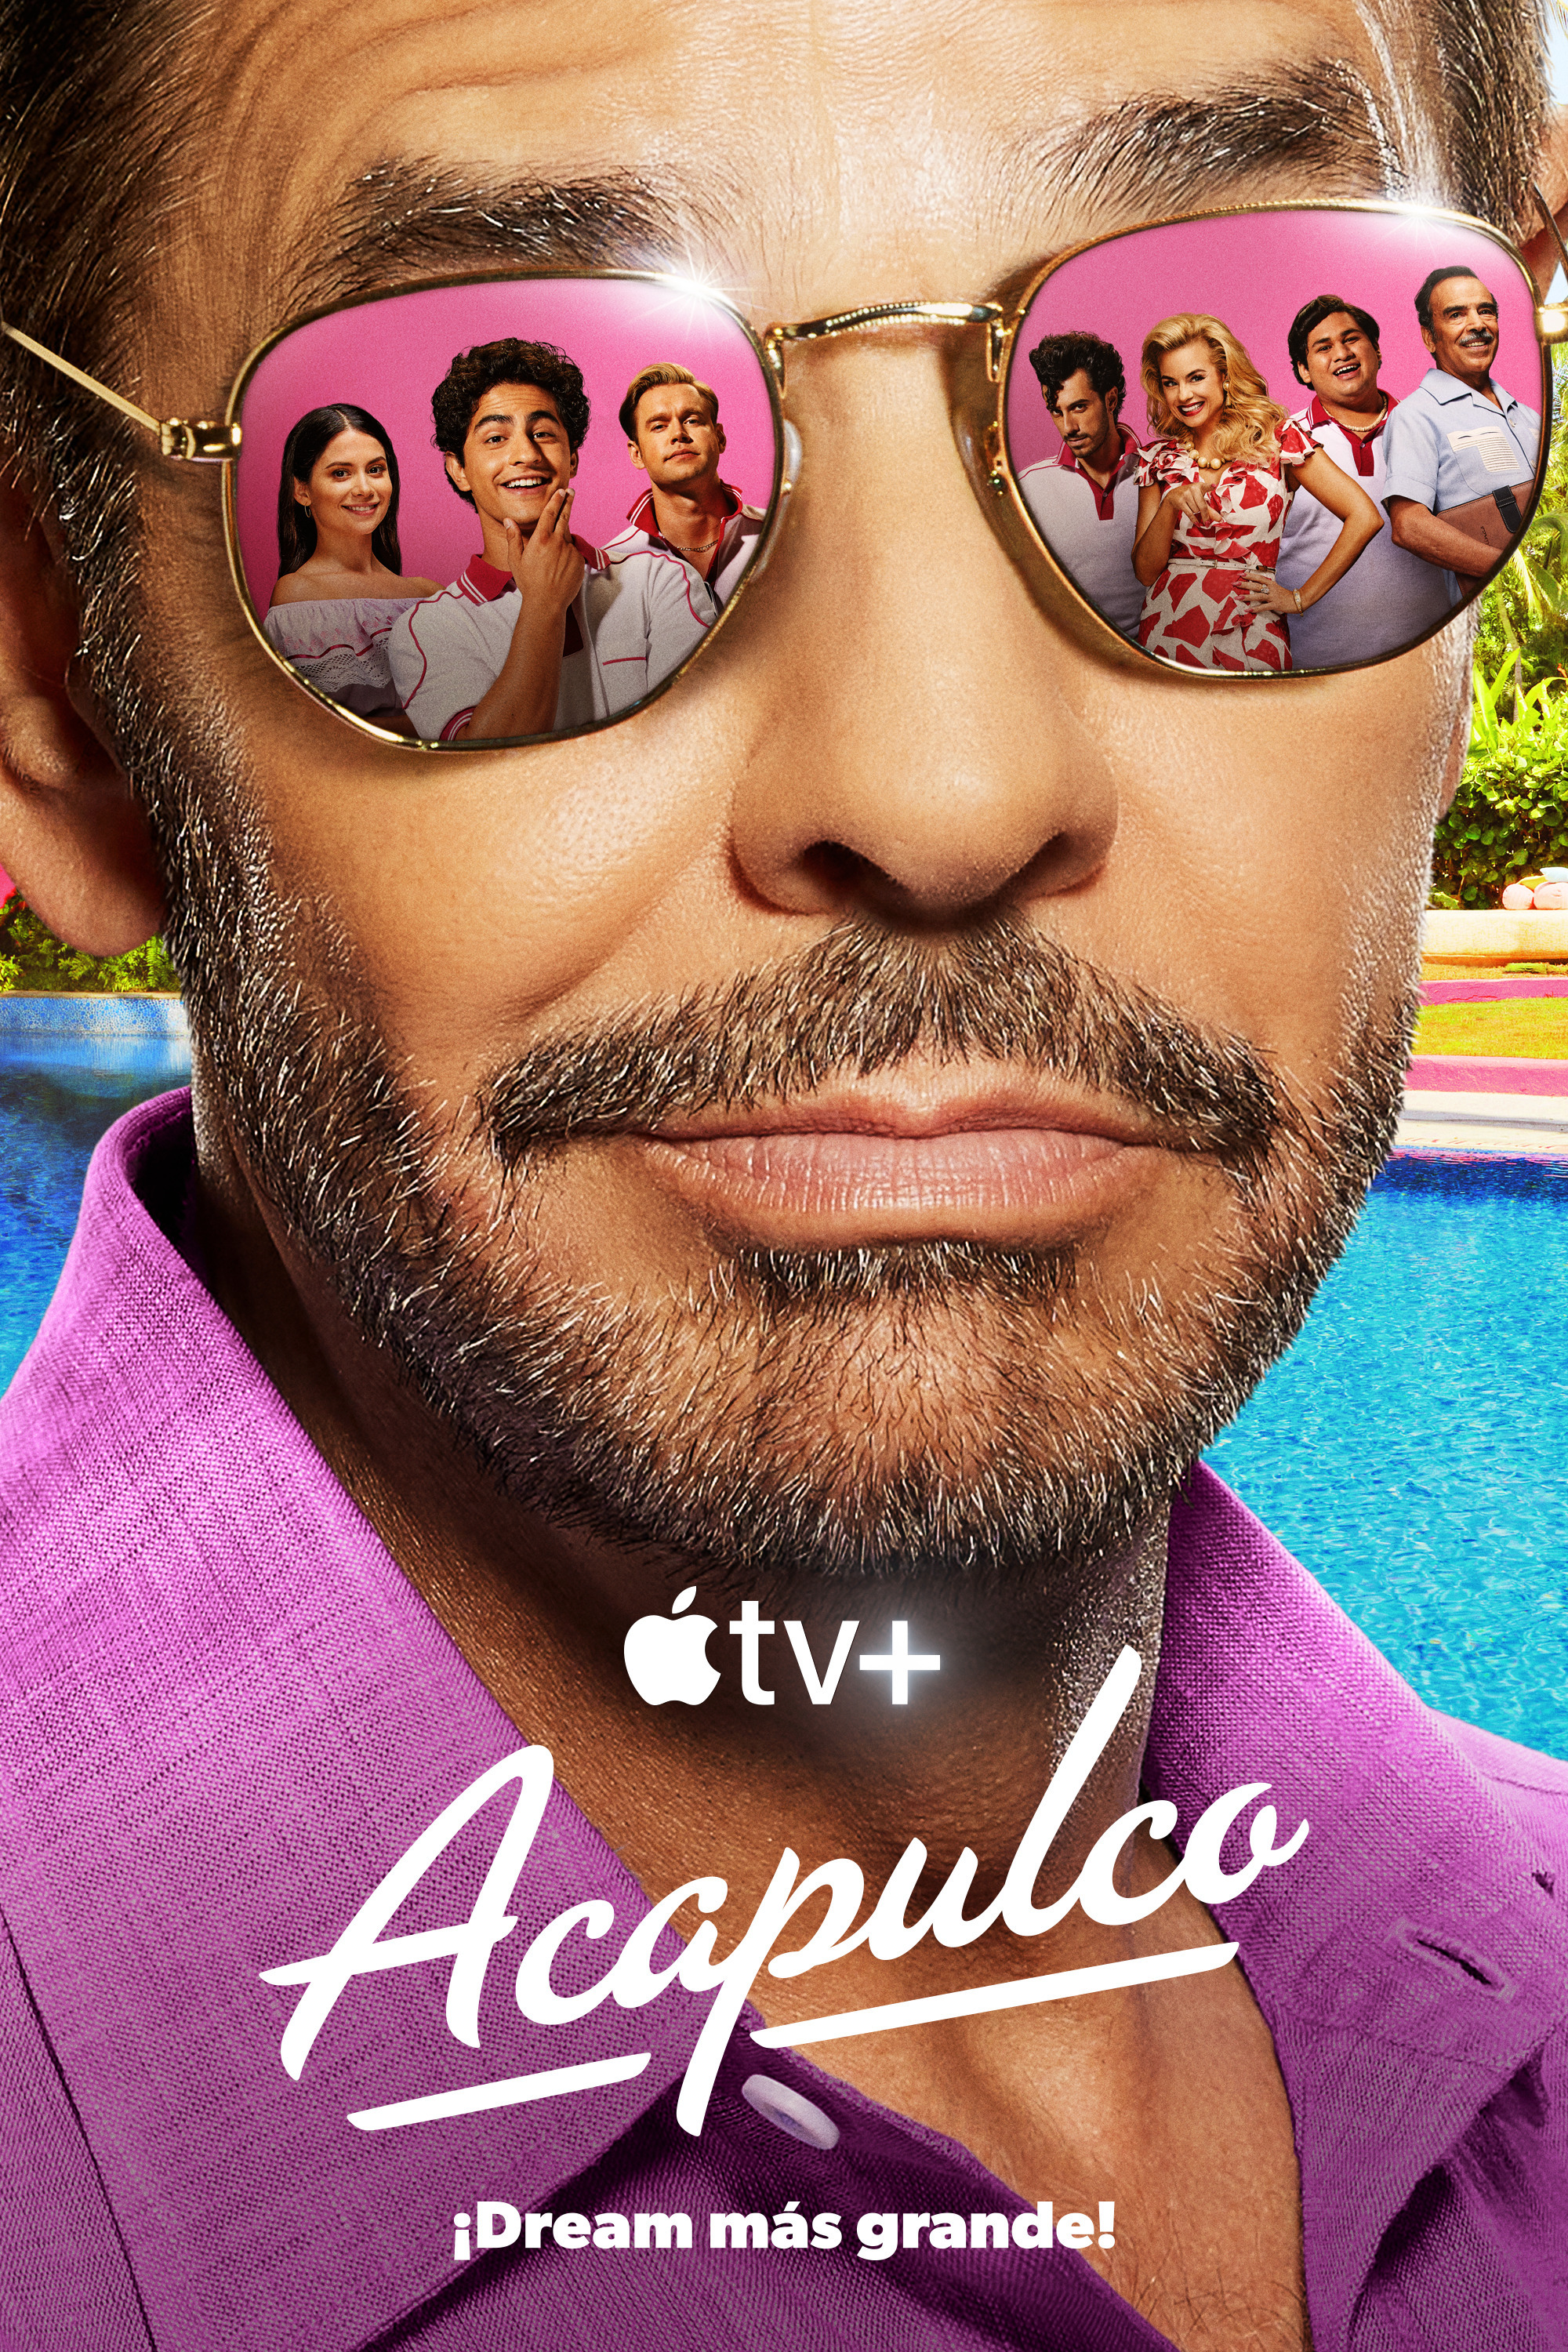 Mega Sized TV Poster Image for Acapulco (#2 of 2)